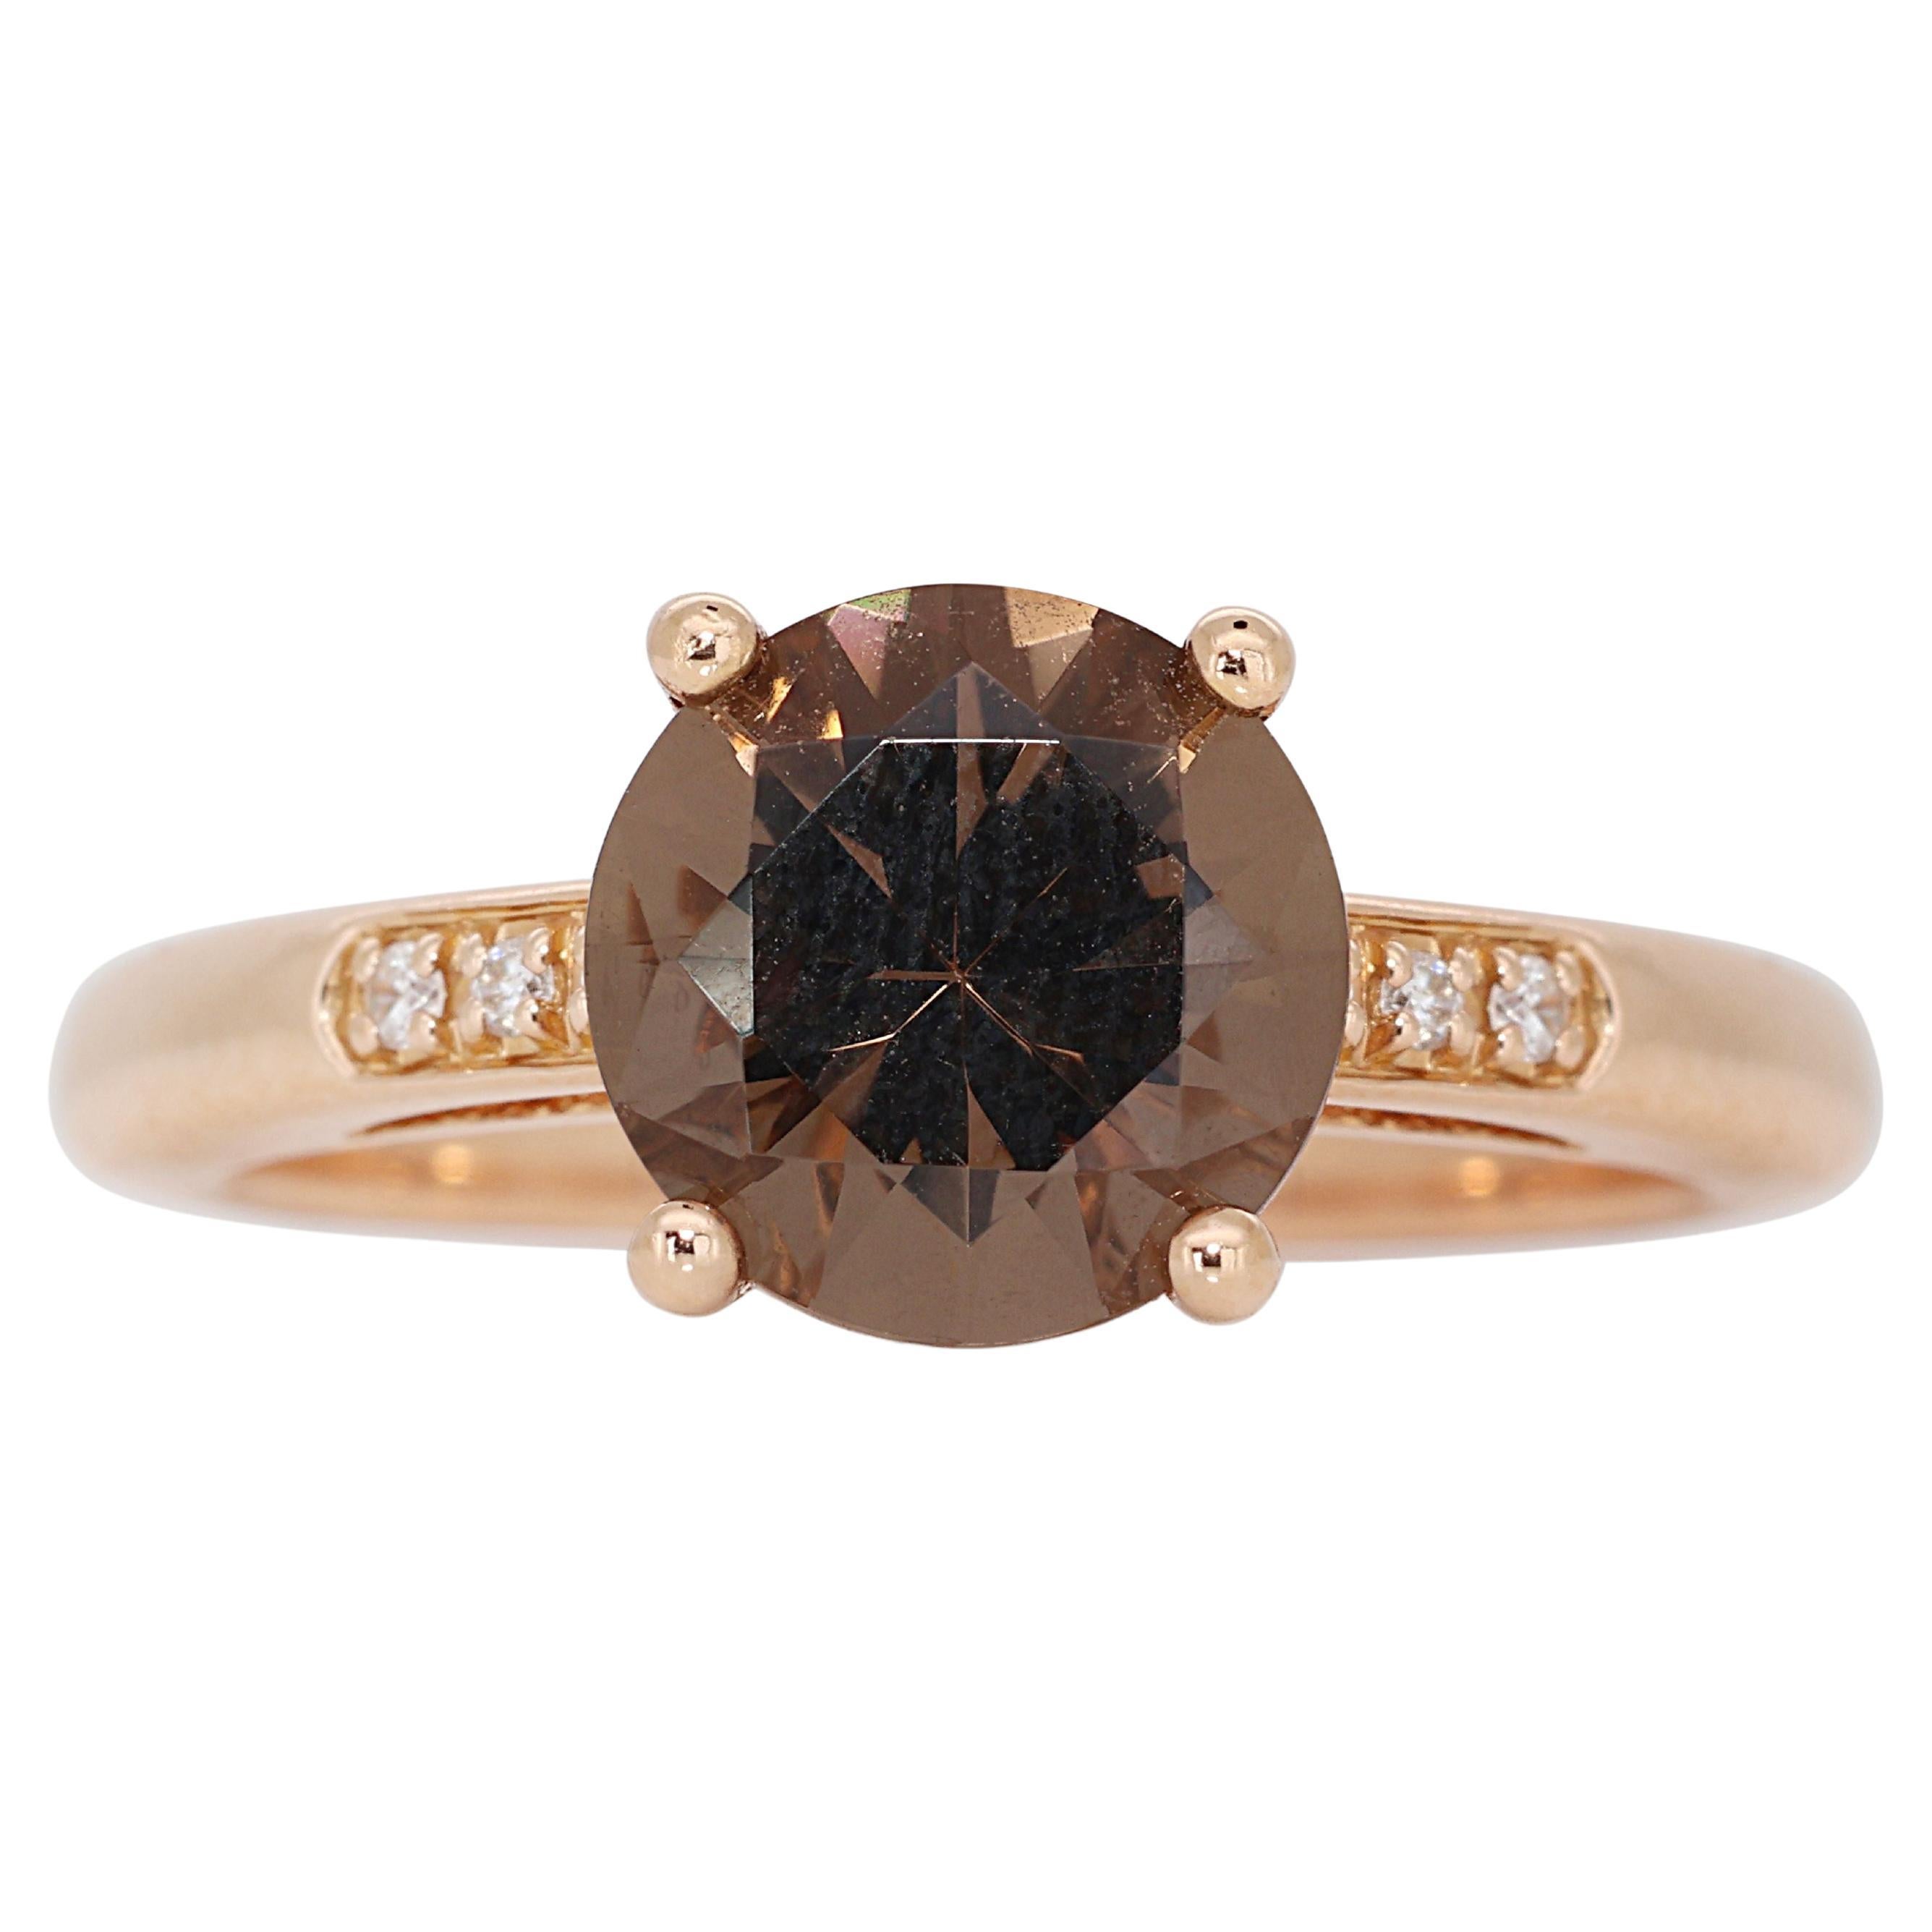 Gorgeous 18k Rose Gold Pave Ring with 1.83 Carat Natural Quartz and Diamonds